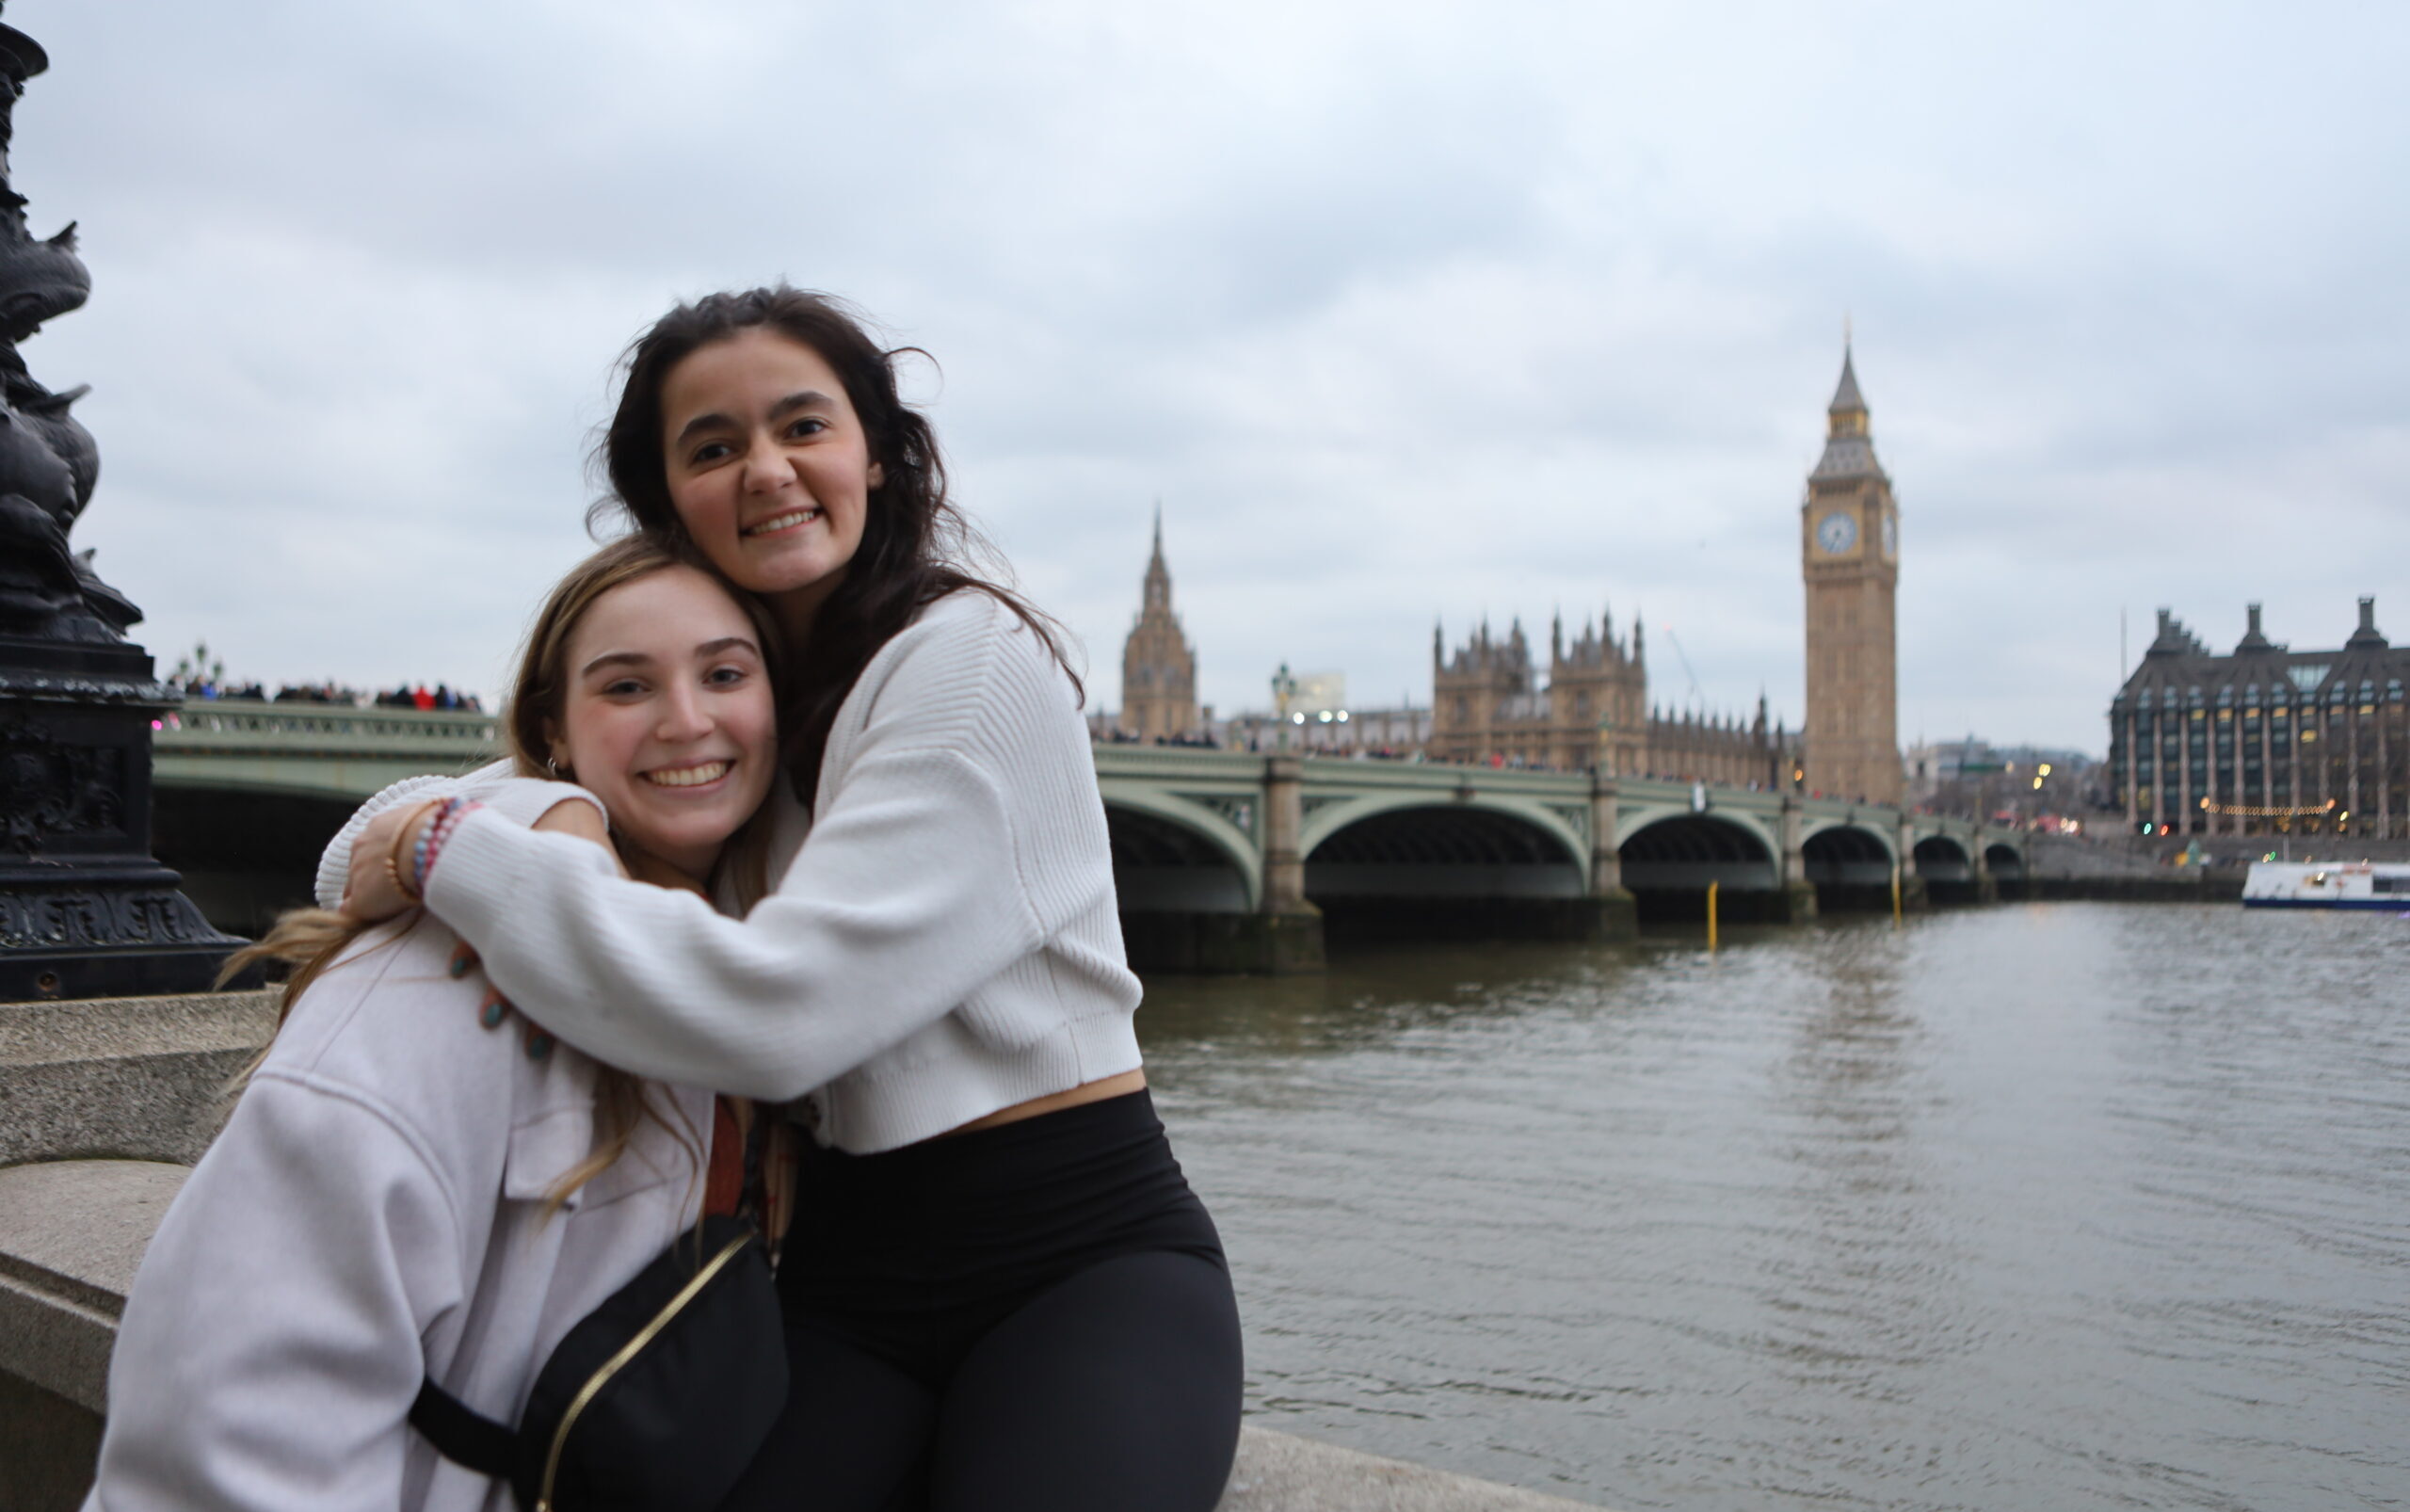 LVC students Nicole and Abby pose in front of Big Ben